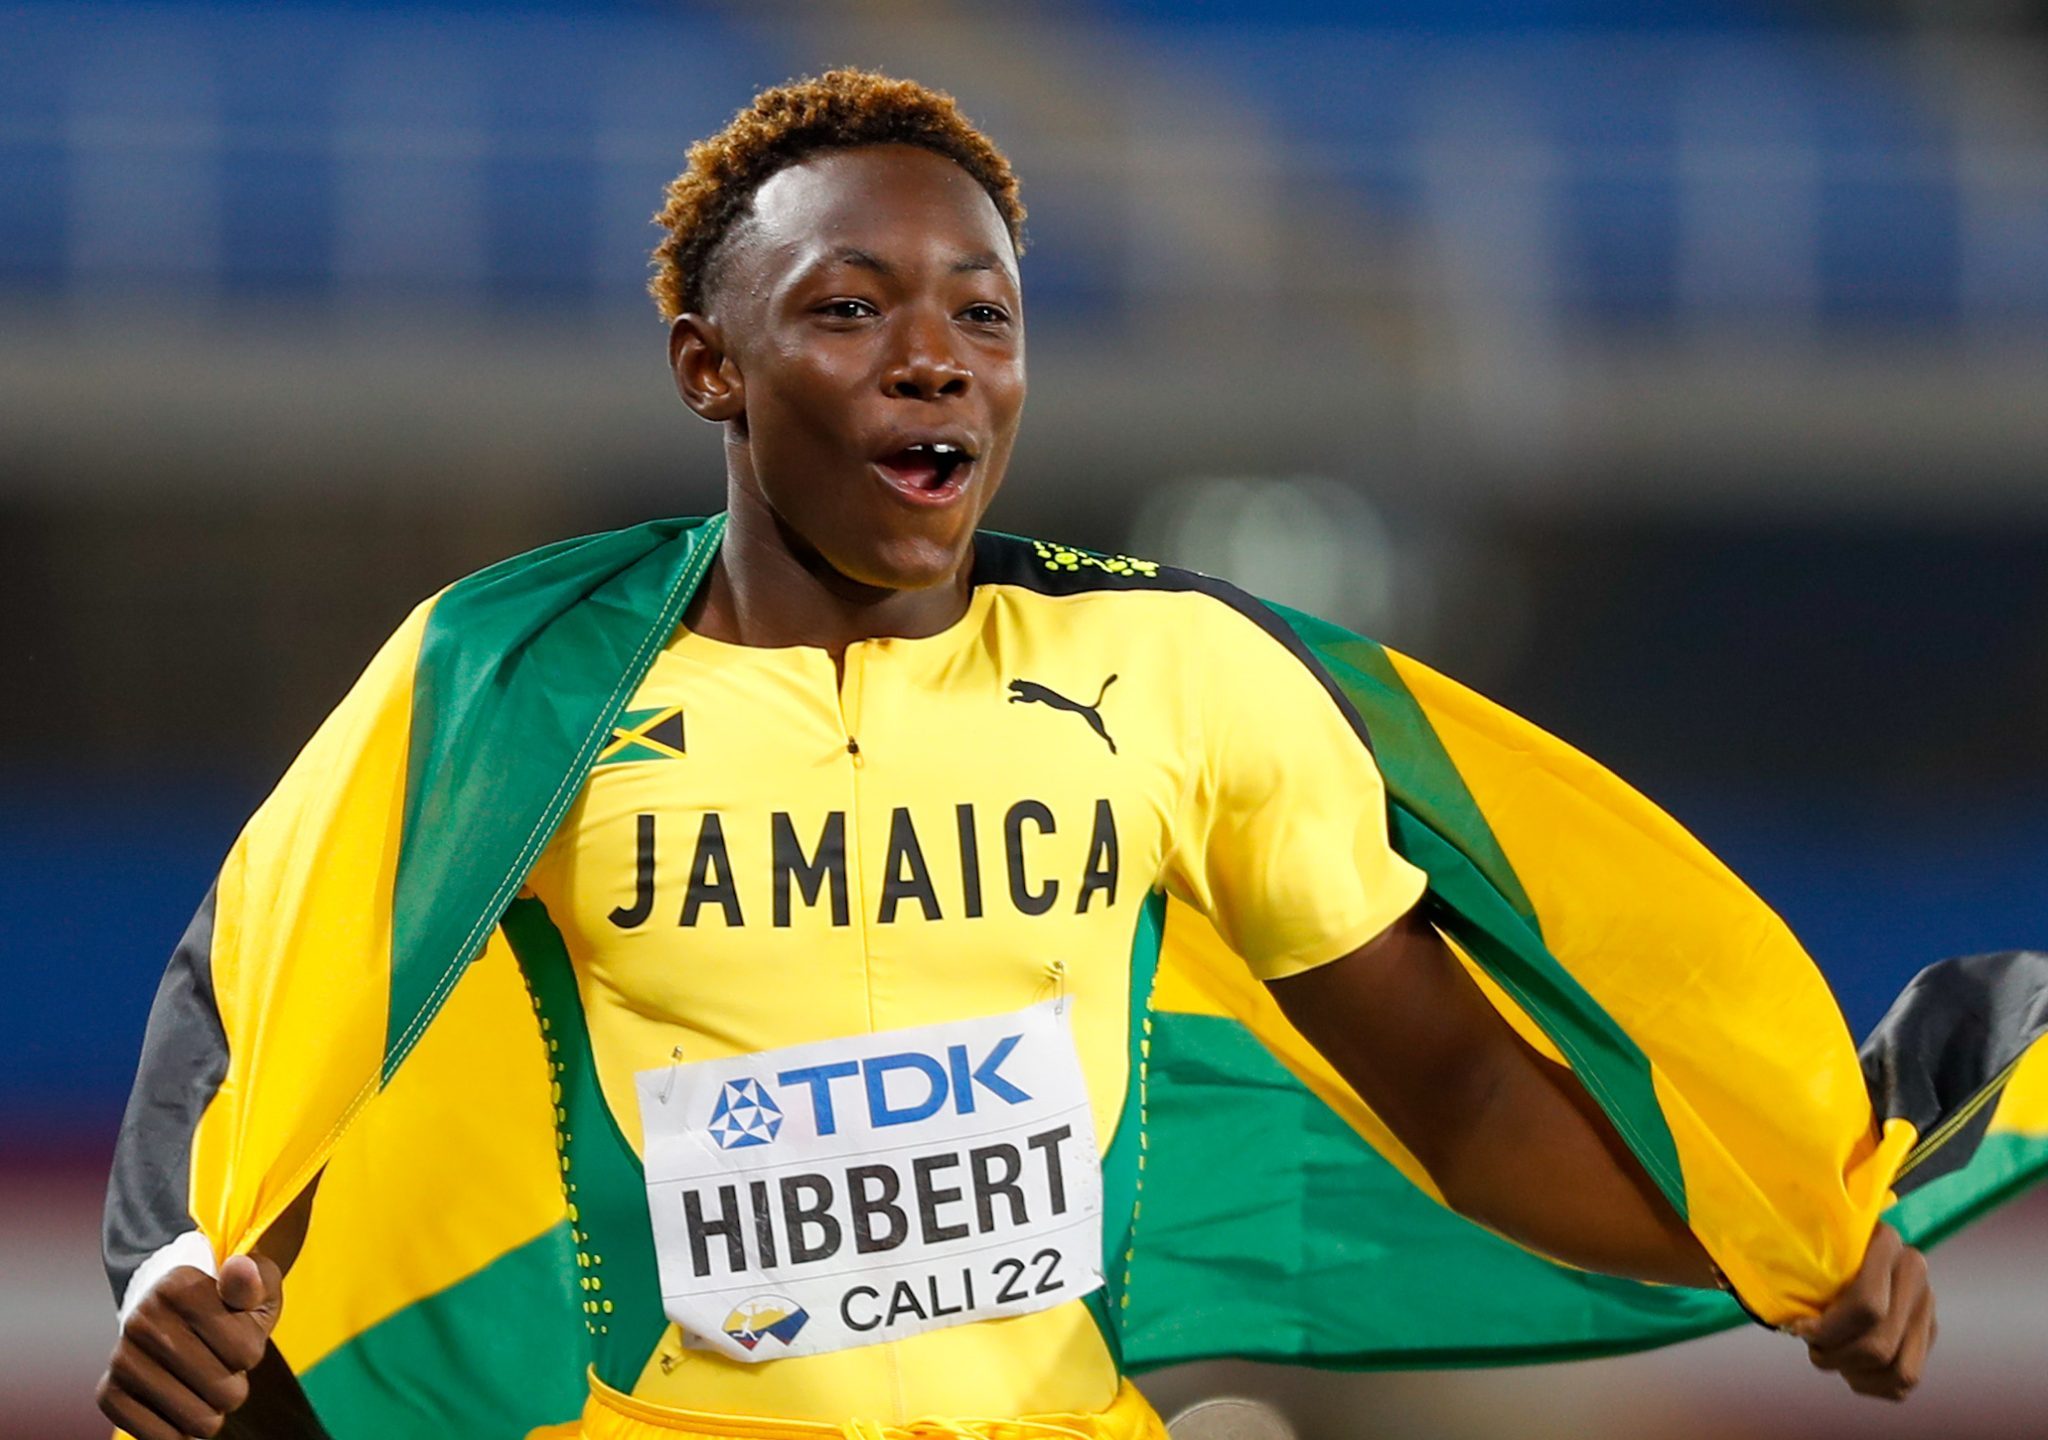 Jaydon Hibbert of Jamaica is the winner of the men's triple jump at the Cali22 World Athletics U20 Championships. He won with a championship record of 17.27m